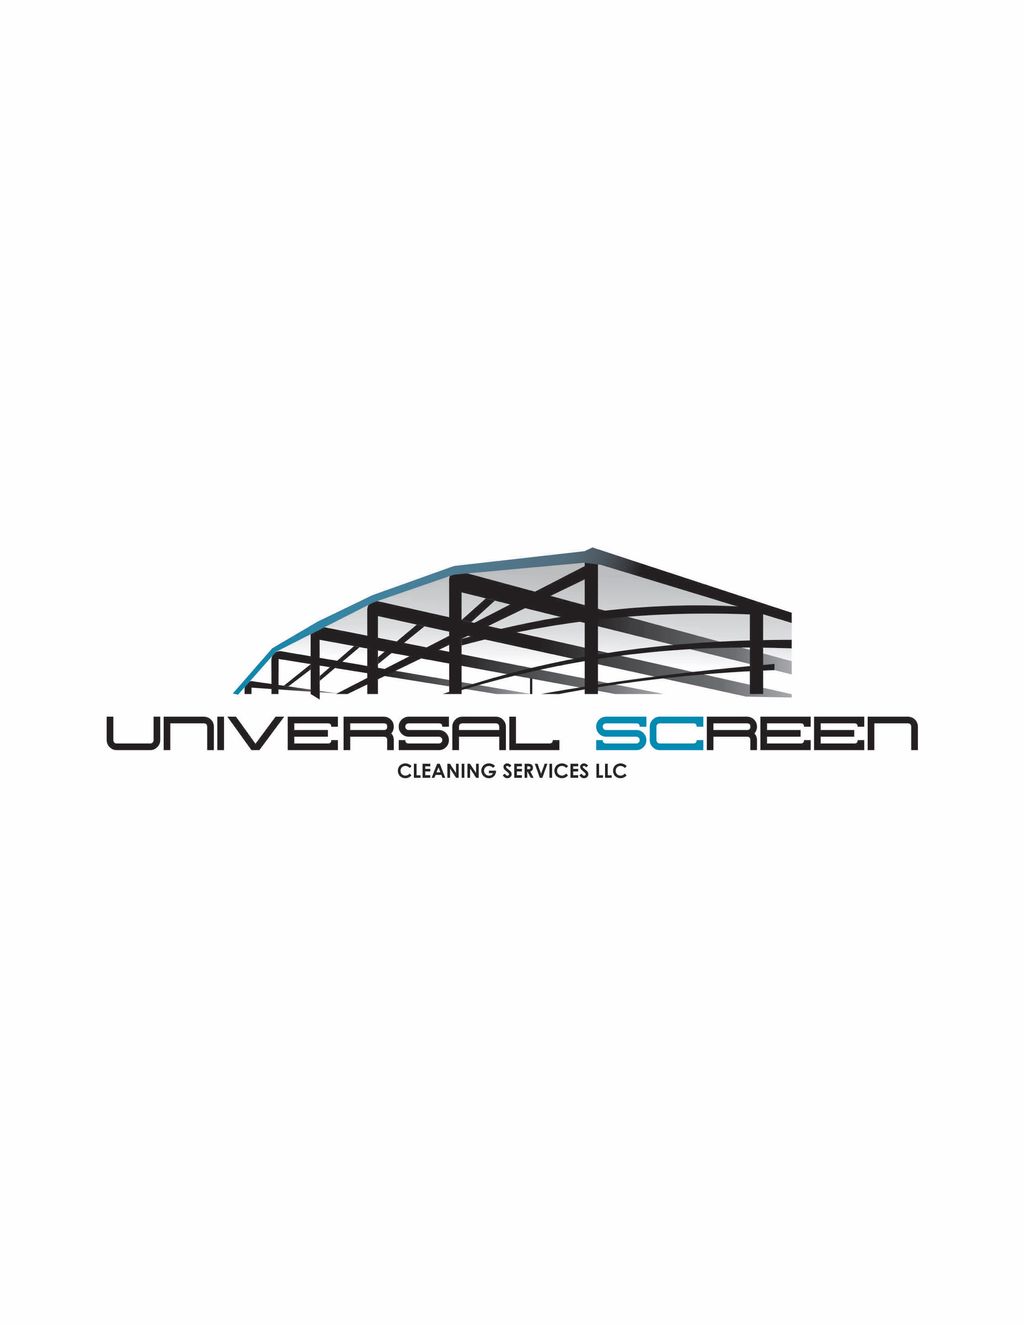 Universal screen&cleaning services LLC